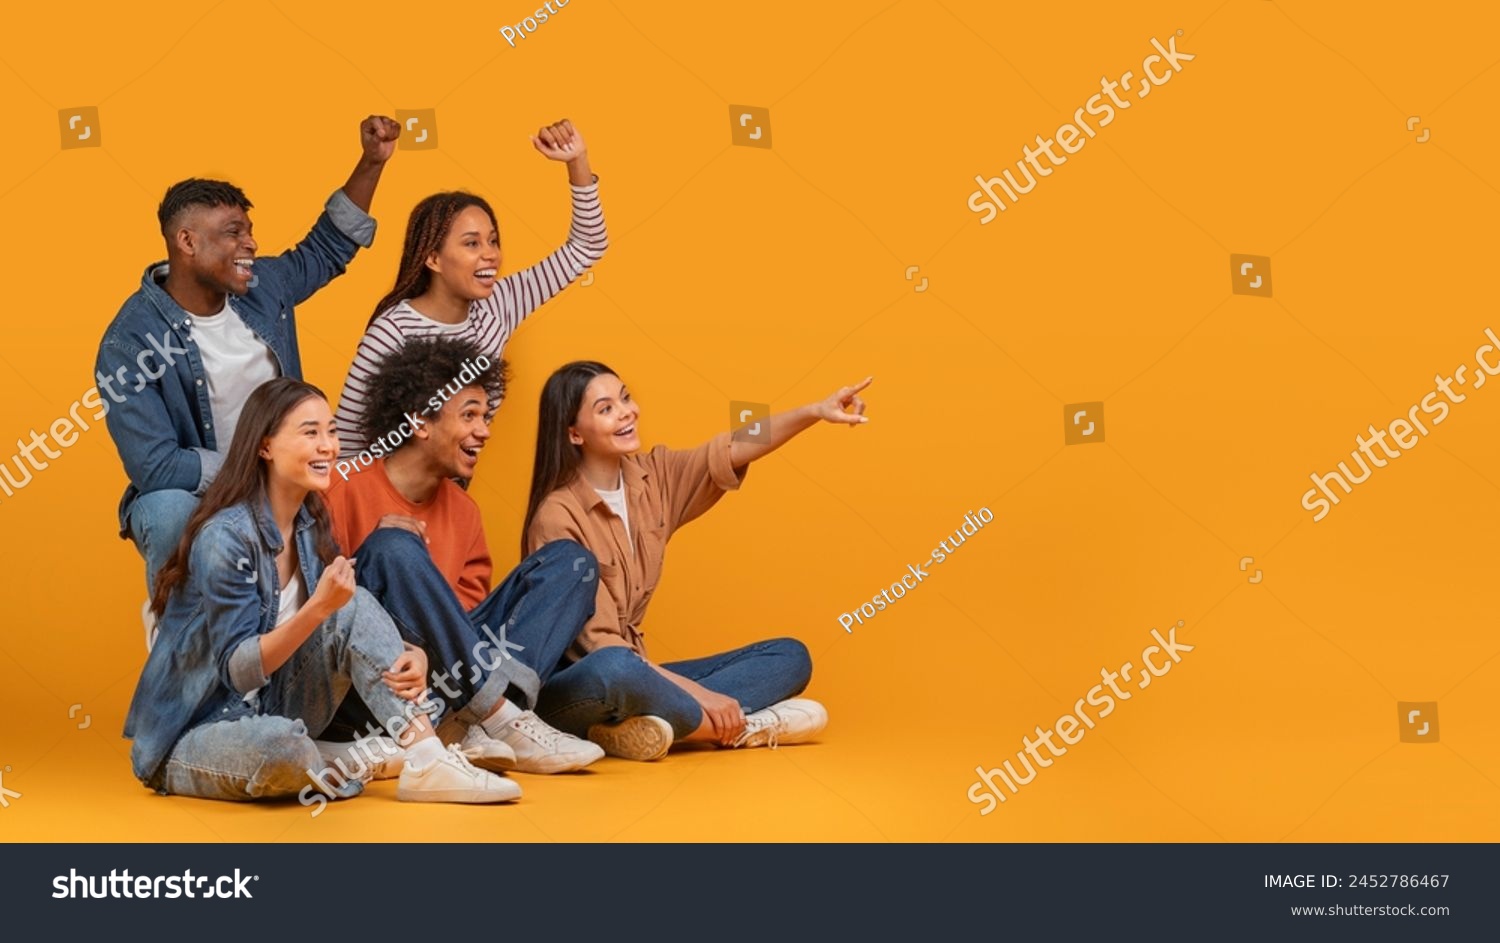 Multiethnic friends excitedly cheering and pointing to the side, exemplifying celebration and happiness in a diverse group, isolated on a yellow background, copy space #2452786467